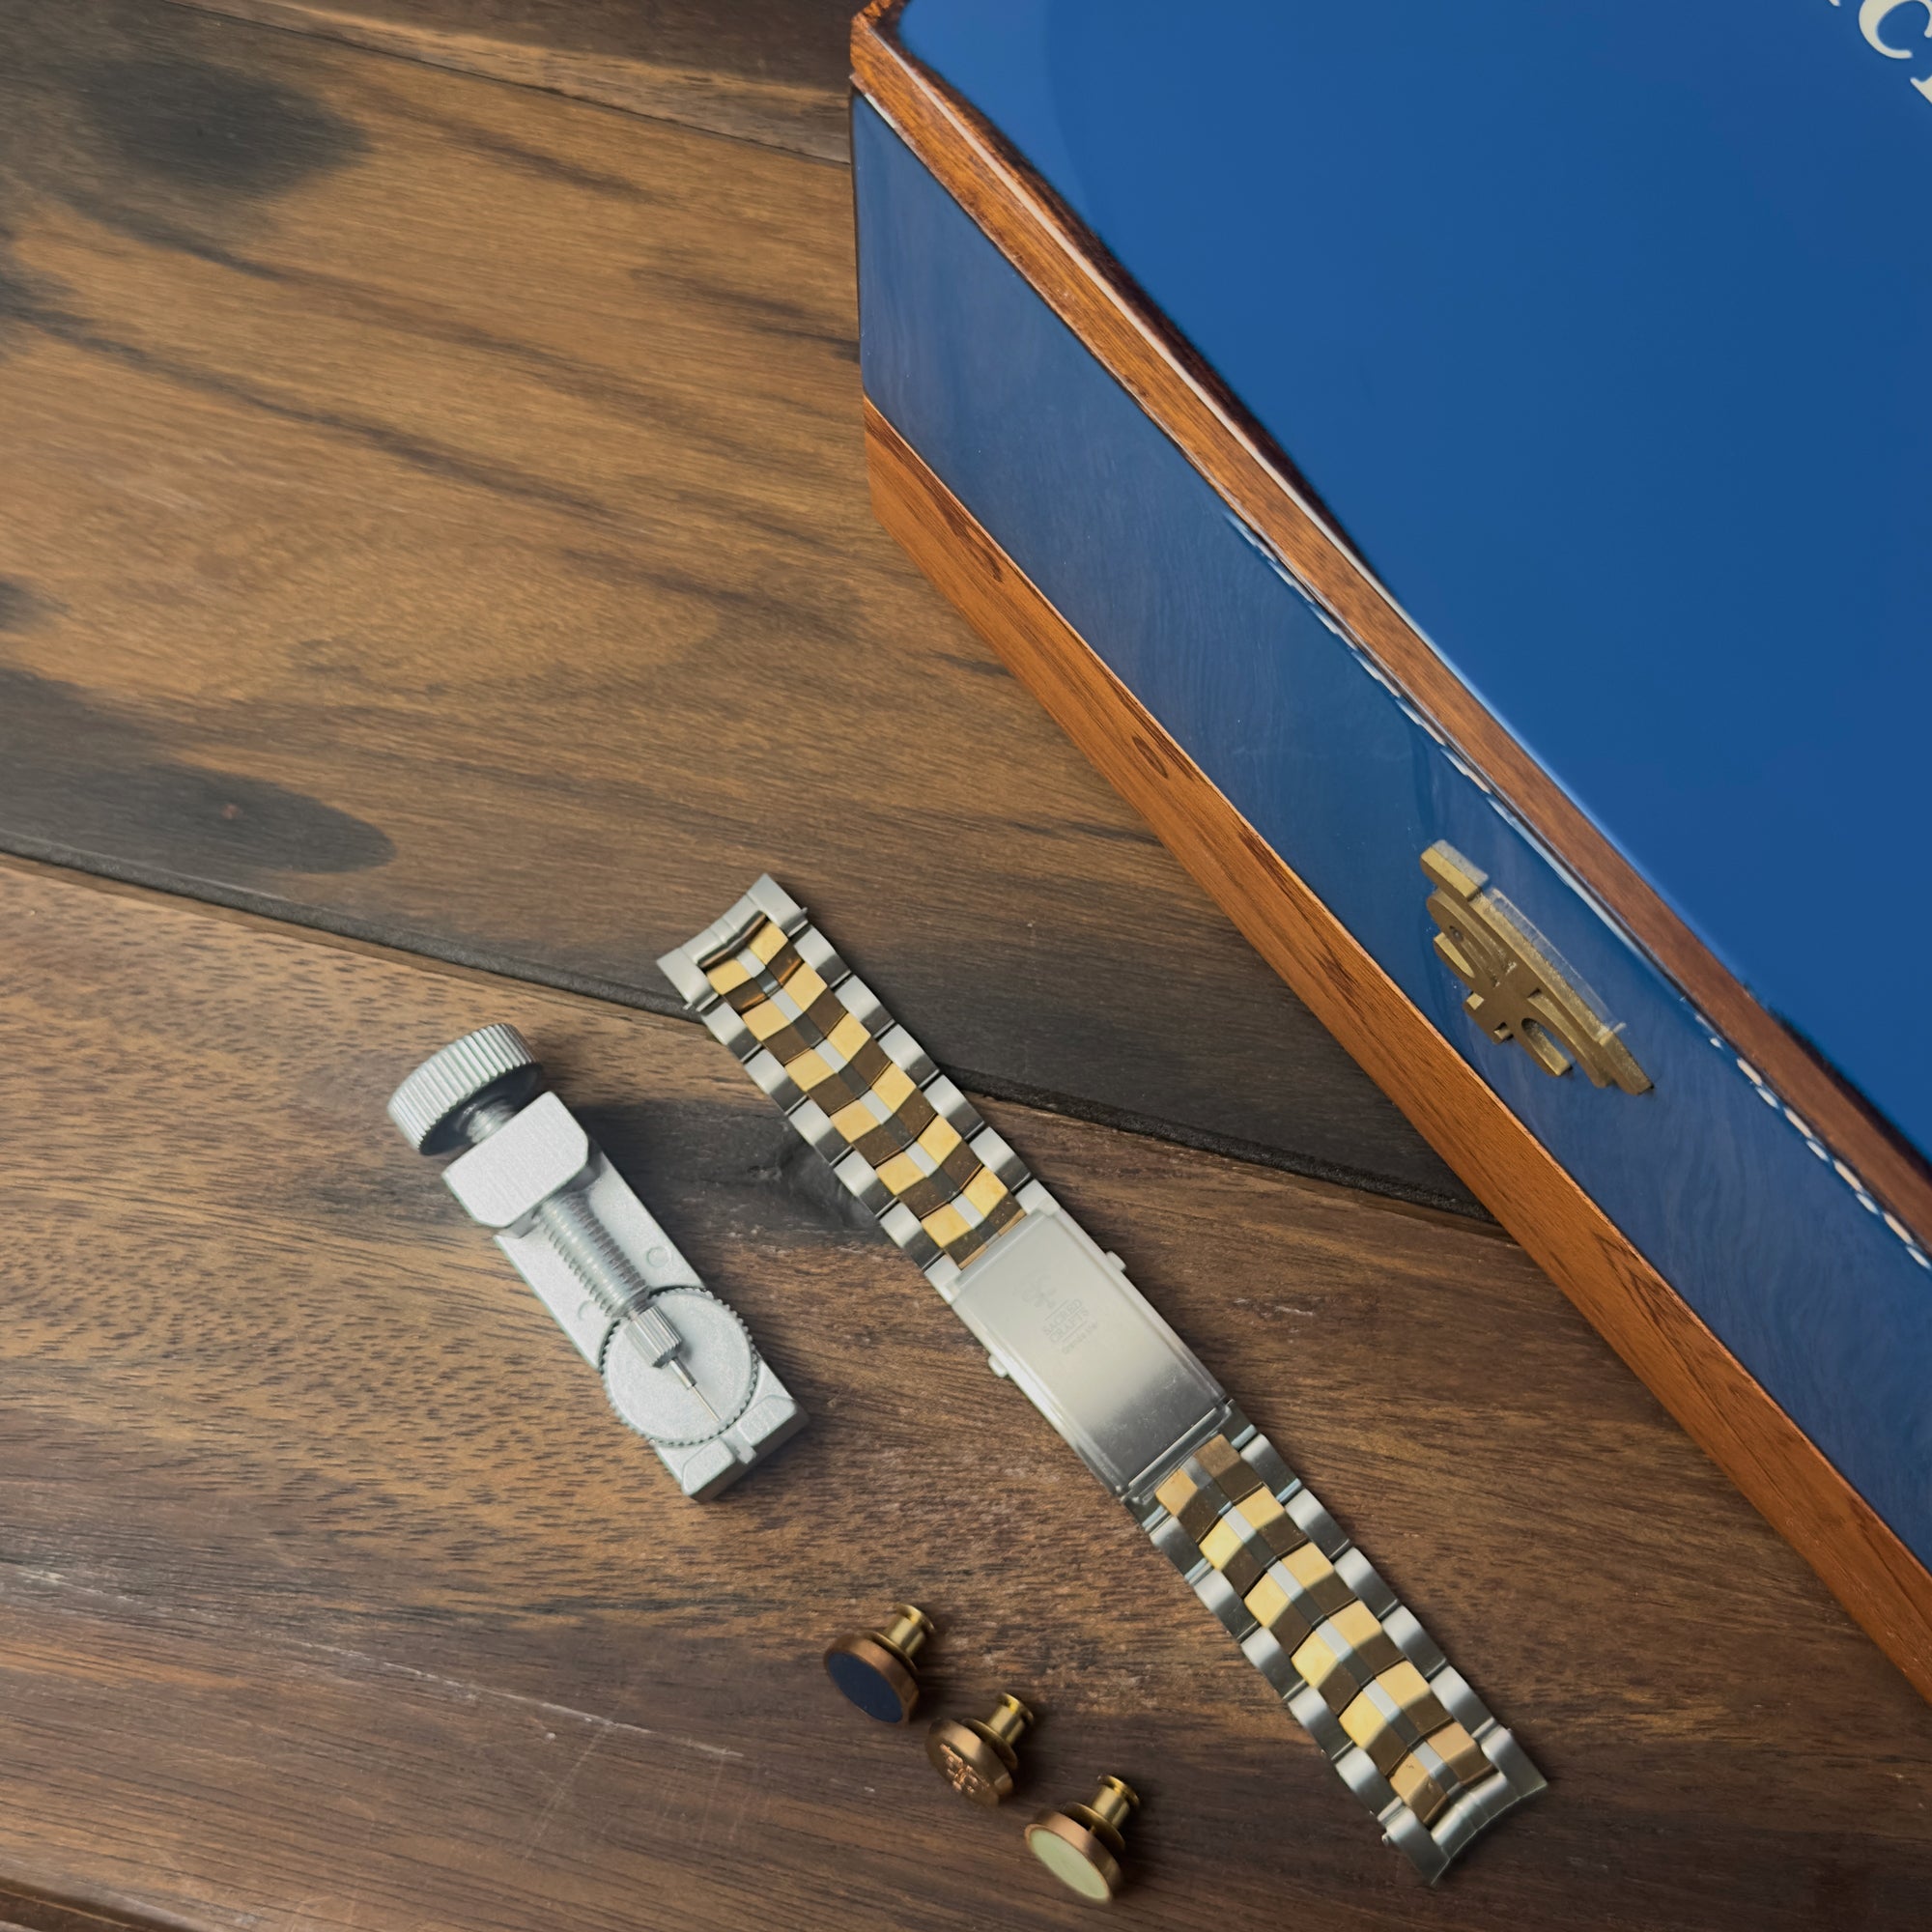 Ugrade This Watch With Link Bracelet & Luxury Reclaimed Wood Box